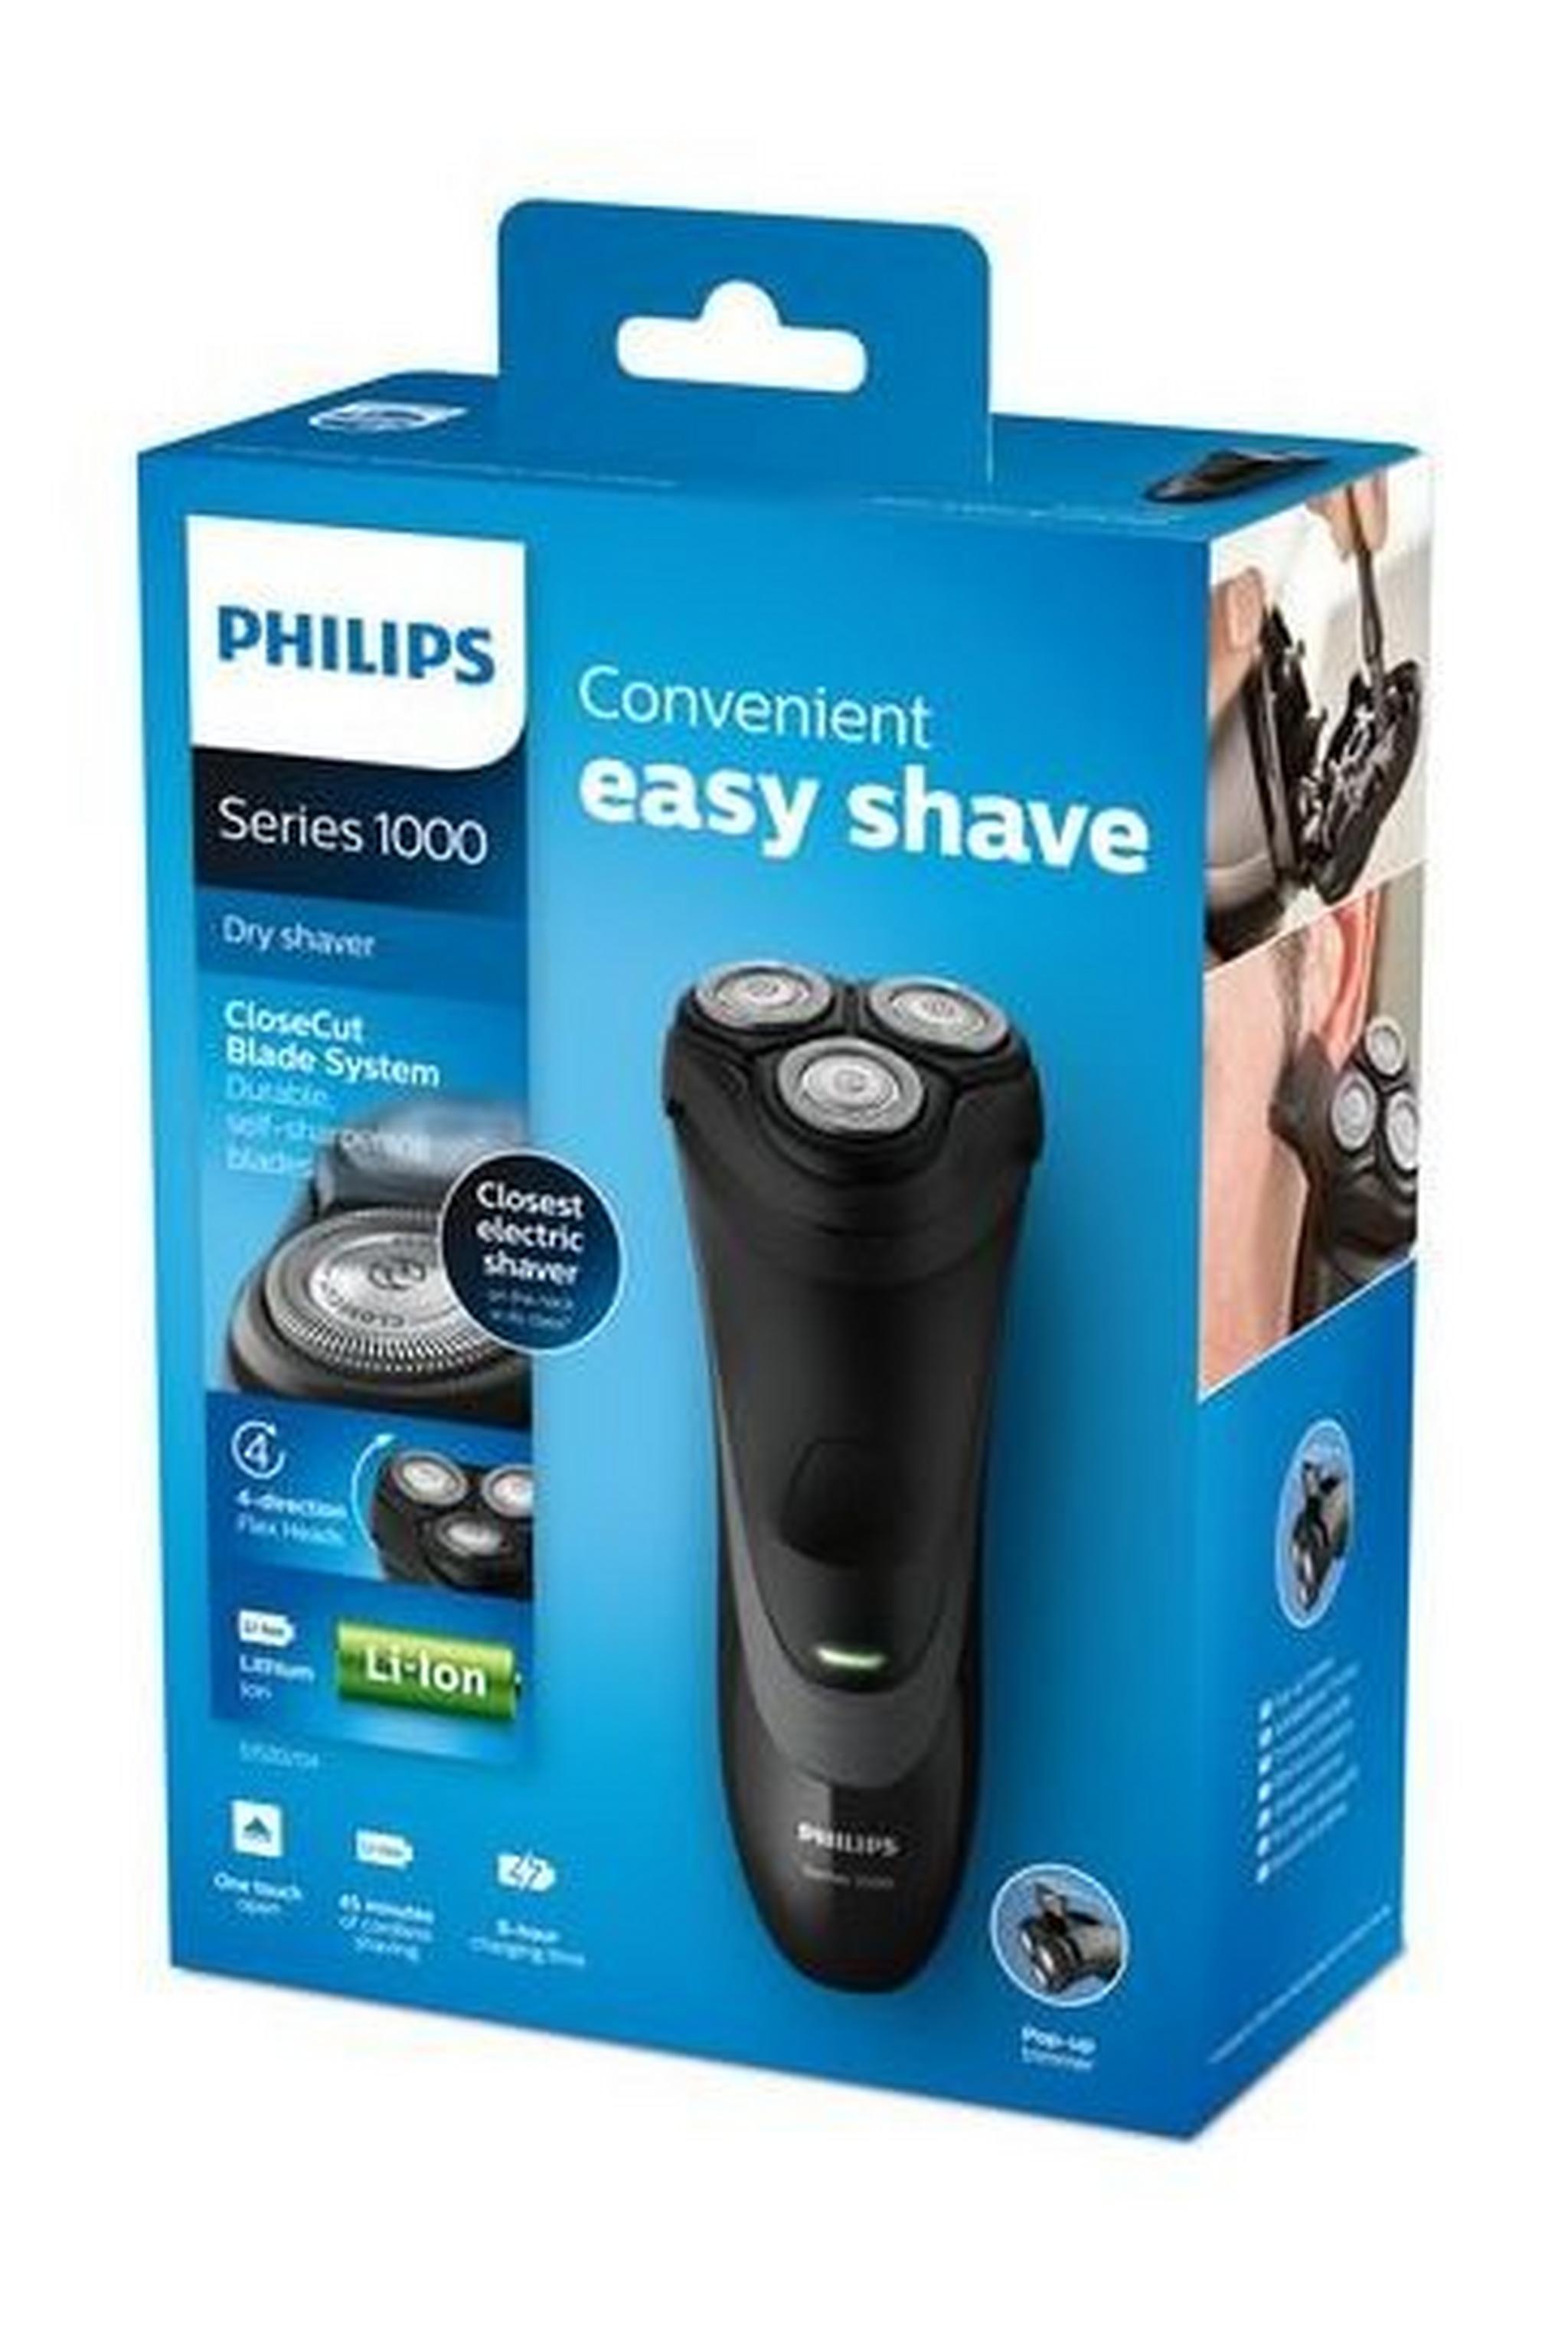 Philips Series 1000 Dry Electric Shaver (S1520/21) – Black